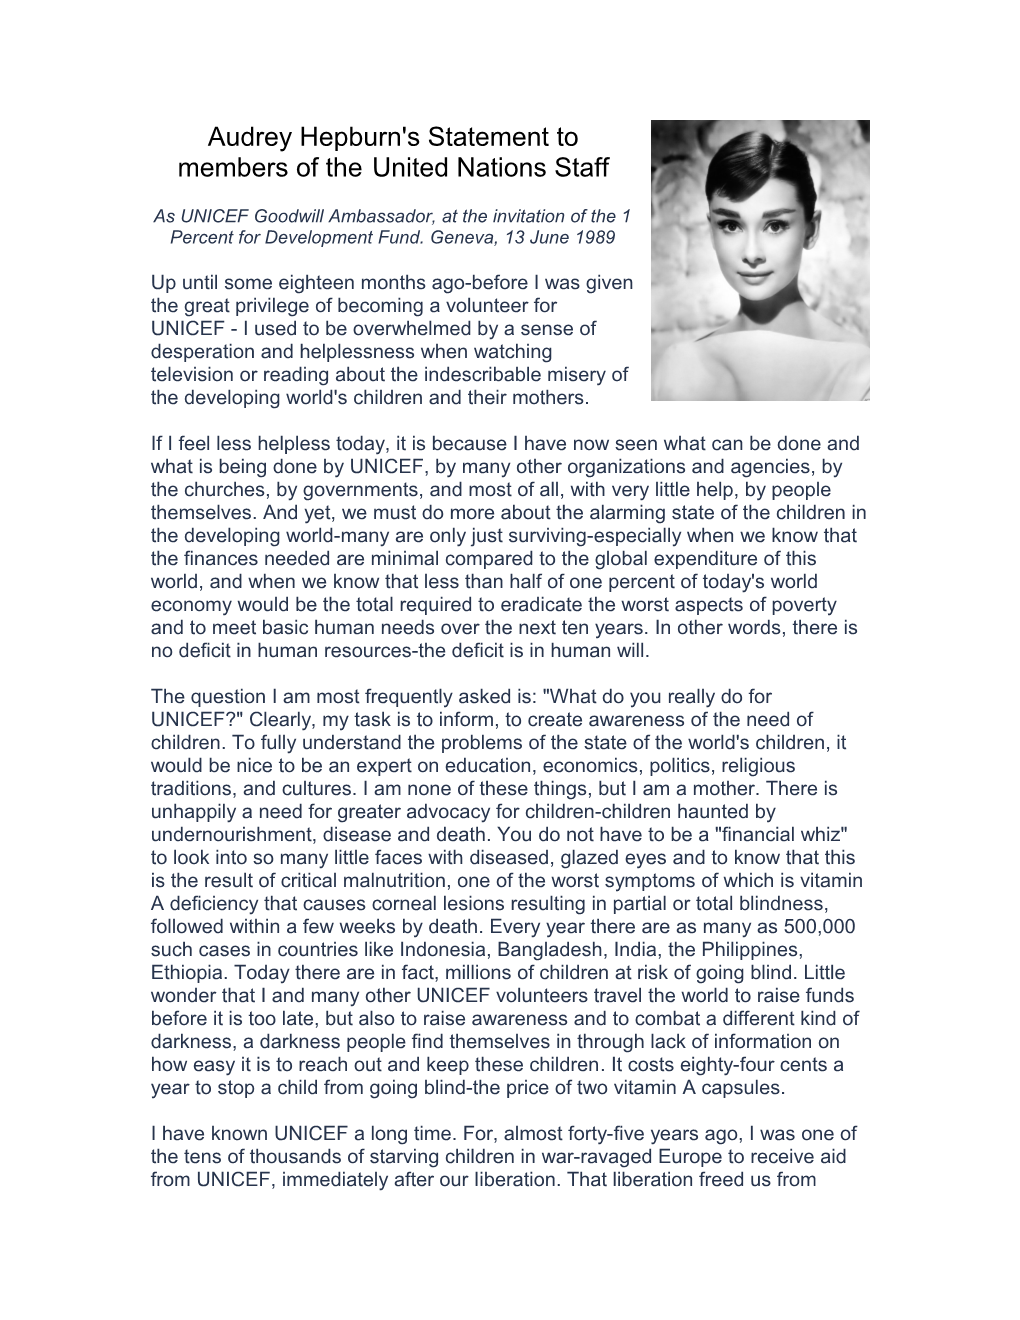 Audrey Hepburn's Statement Tomembers of the United Nations Staff